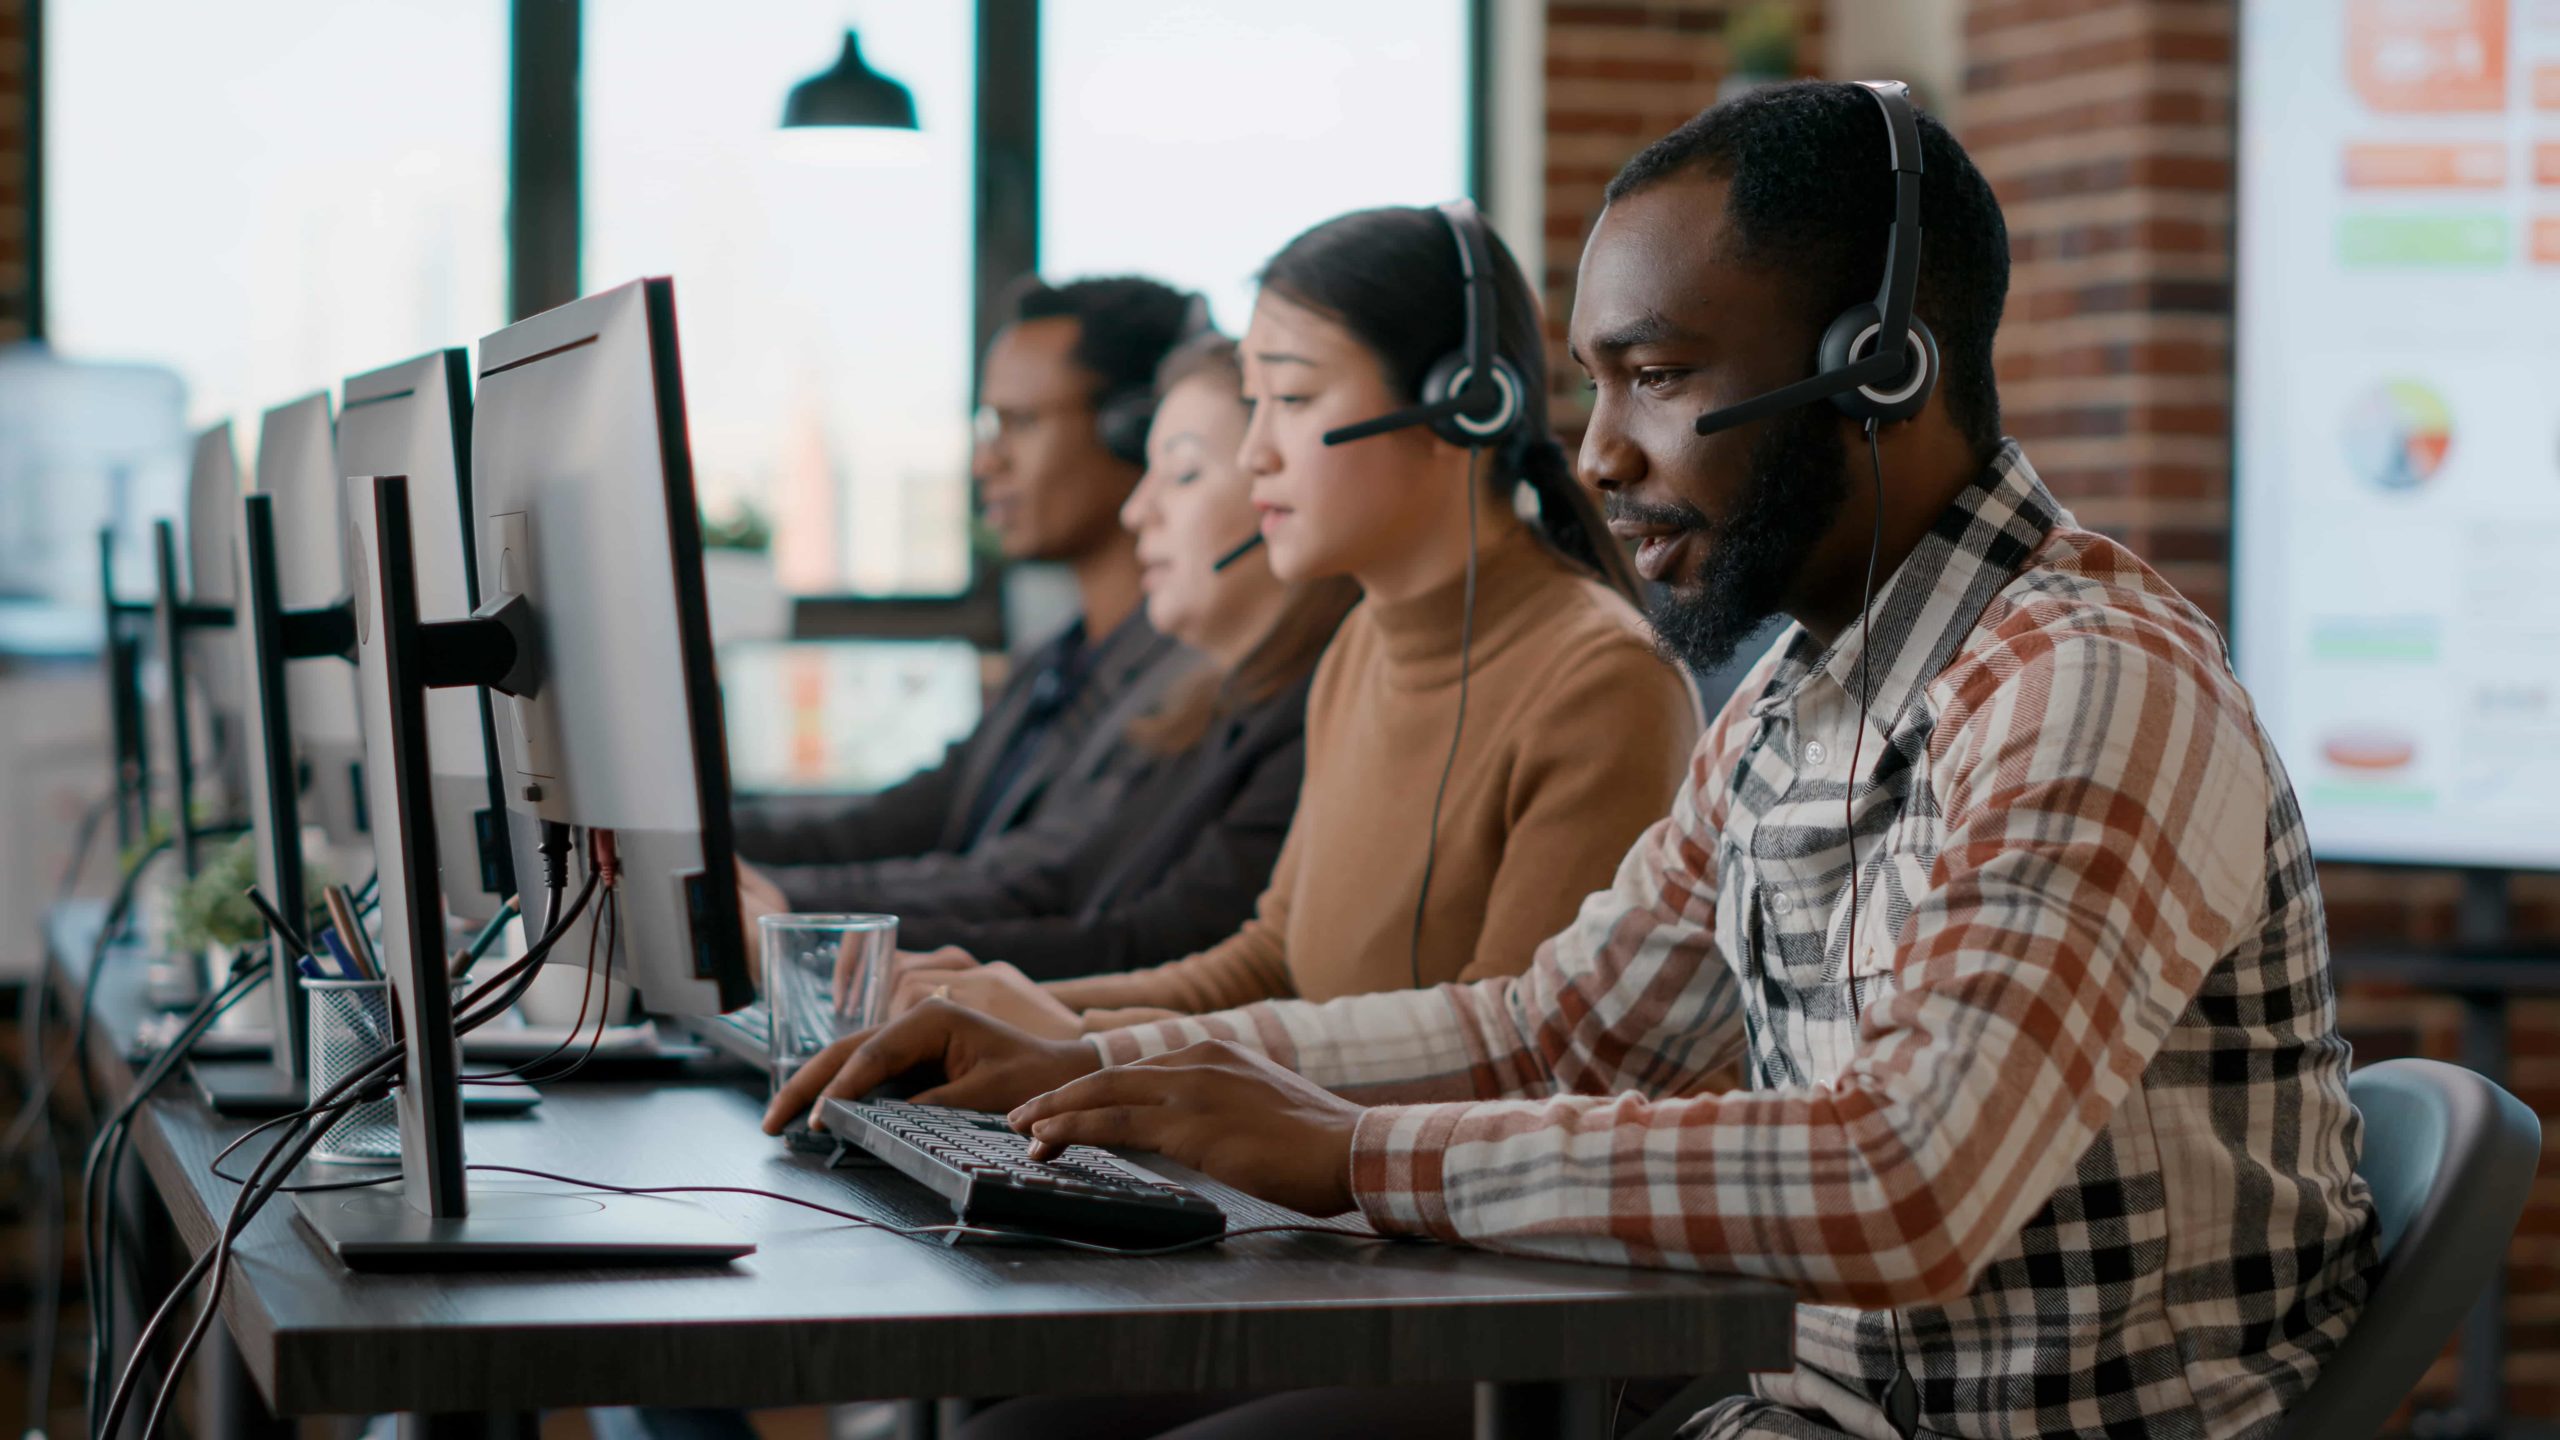 A few customer service employees assist customers with the help of contact center automation.